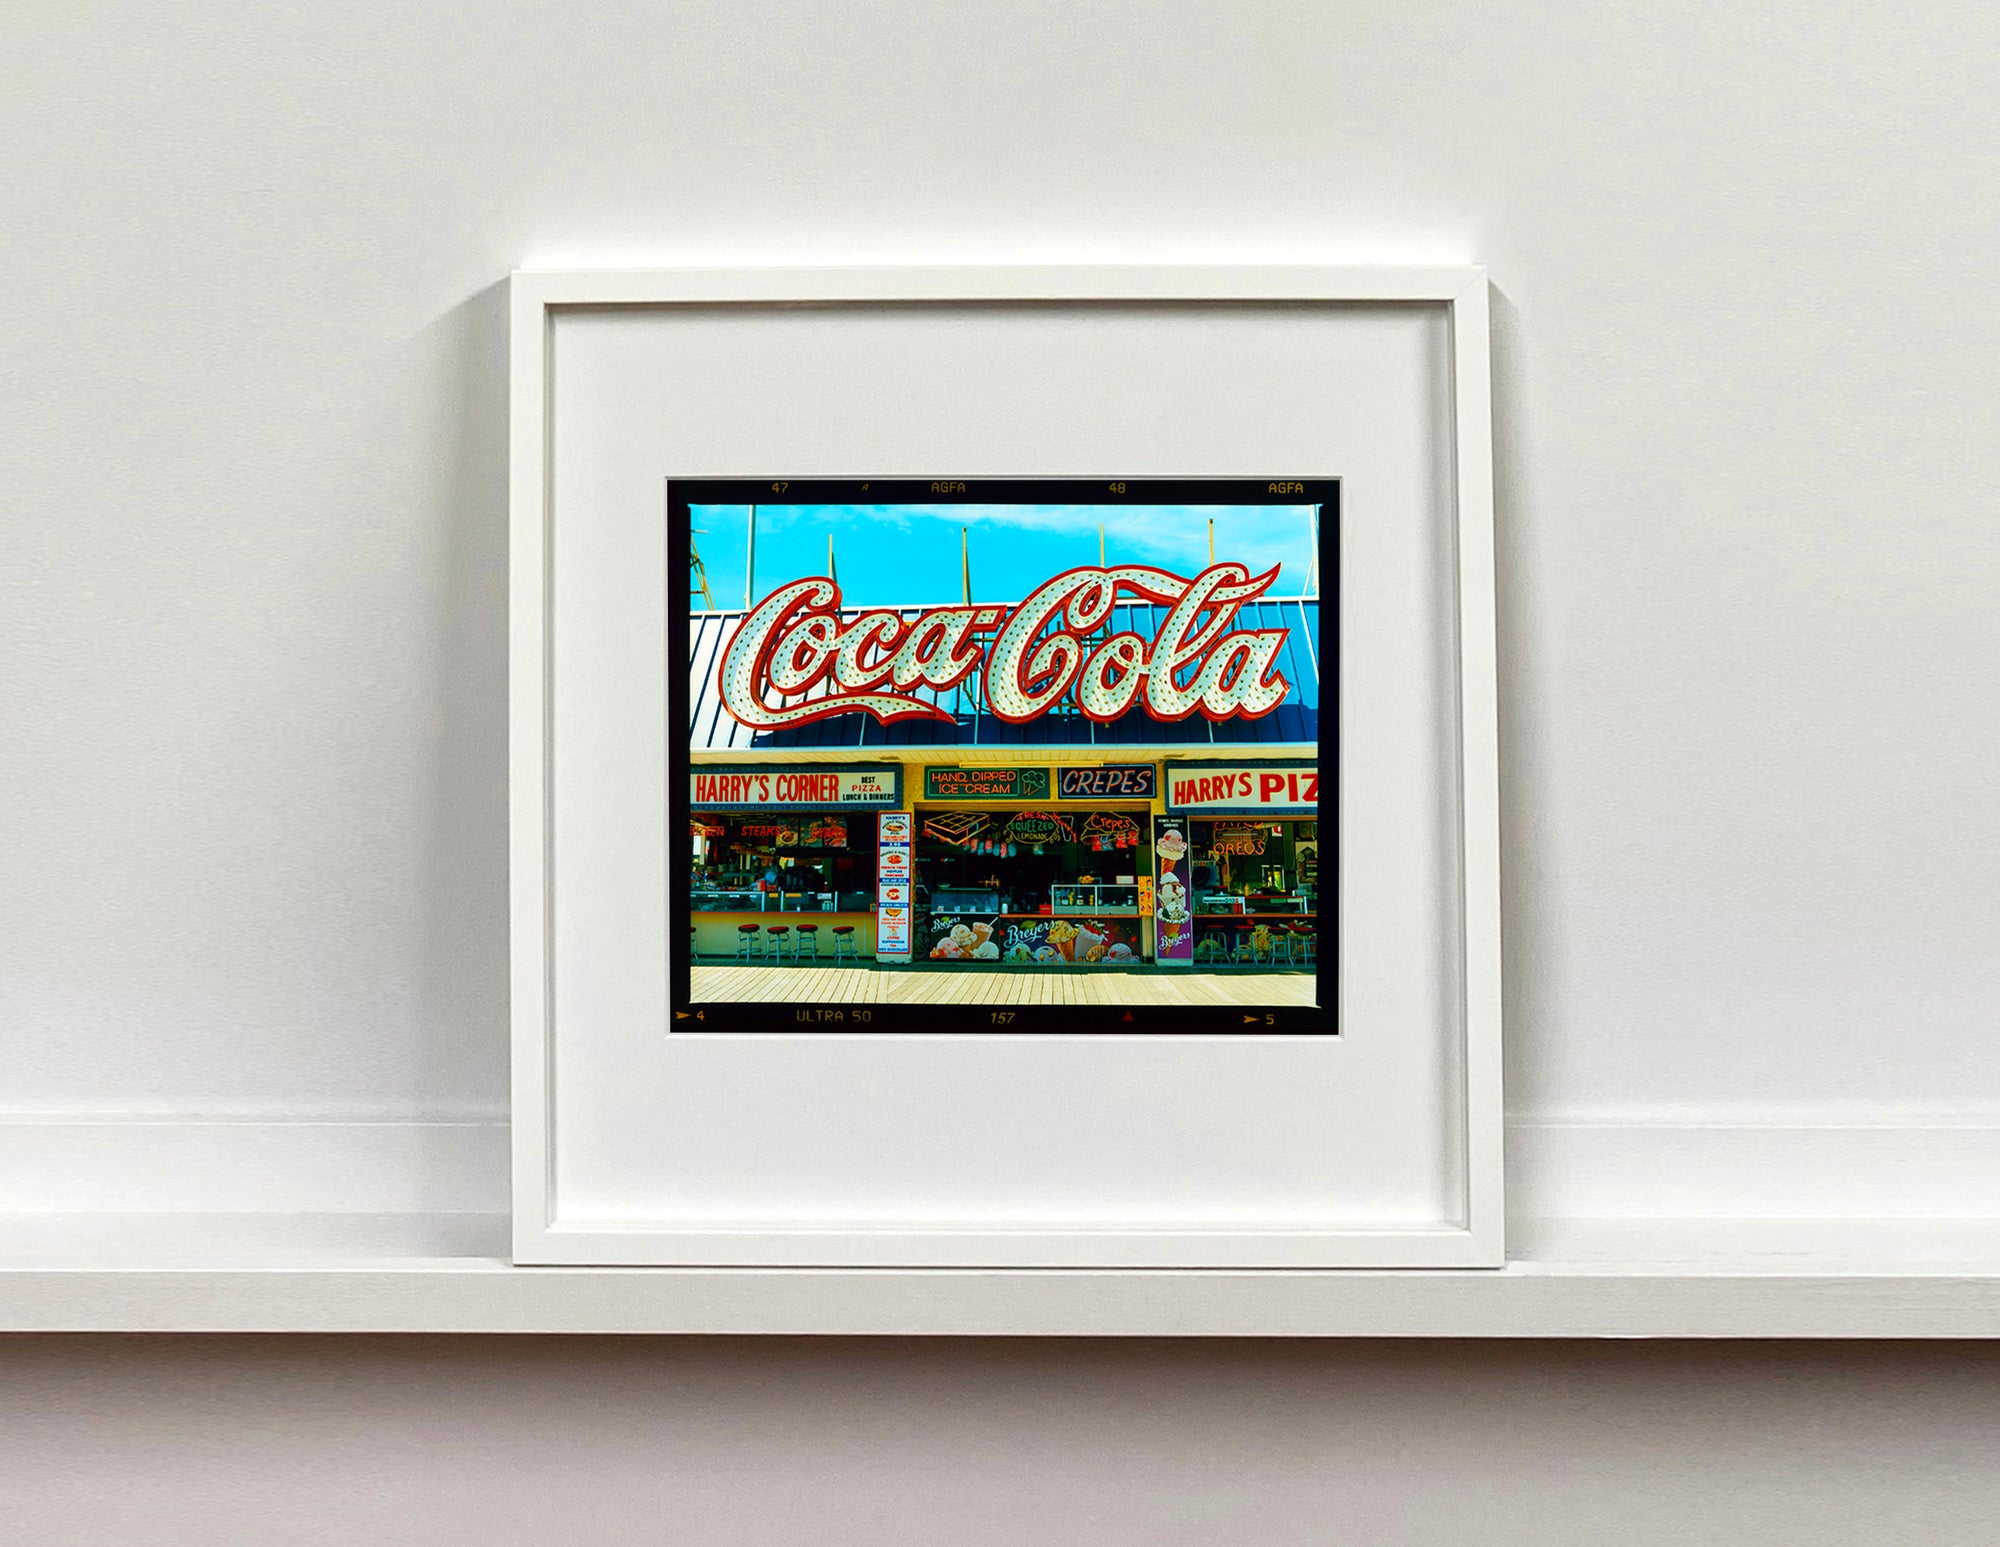 Harry's Corner, a photograph by Richard Heeps taken on the Wildwood boardwalk, featuring neon typography and the iconic Coca-Cola sign against a bright blue sky. 